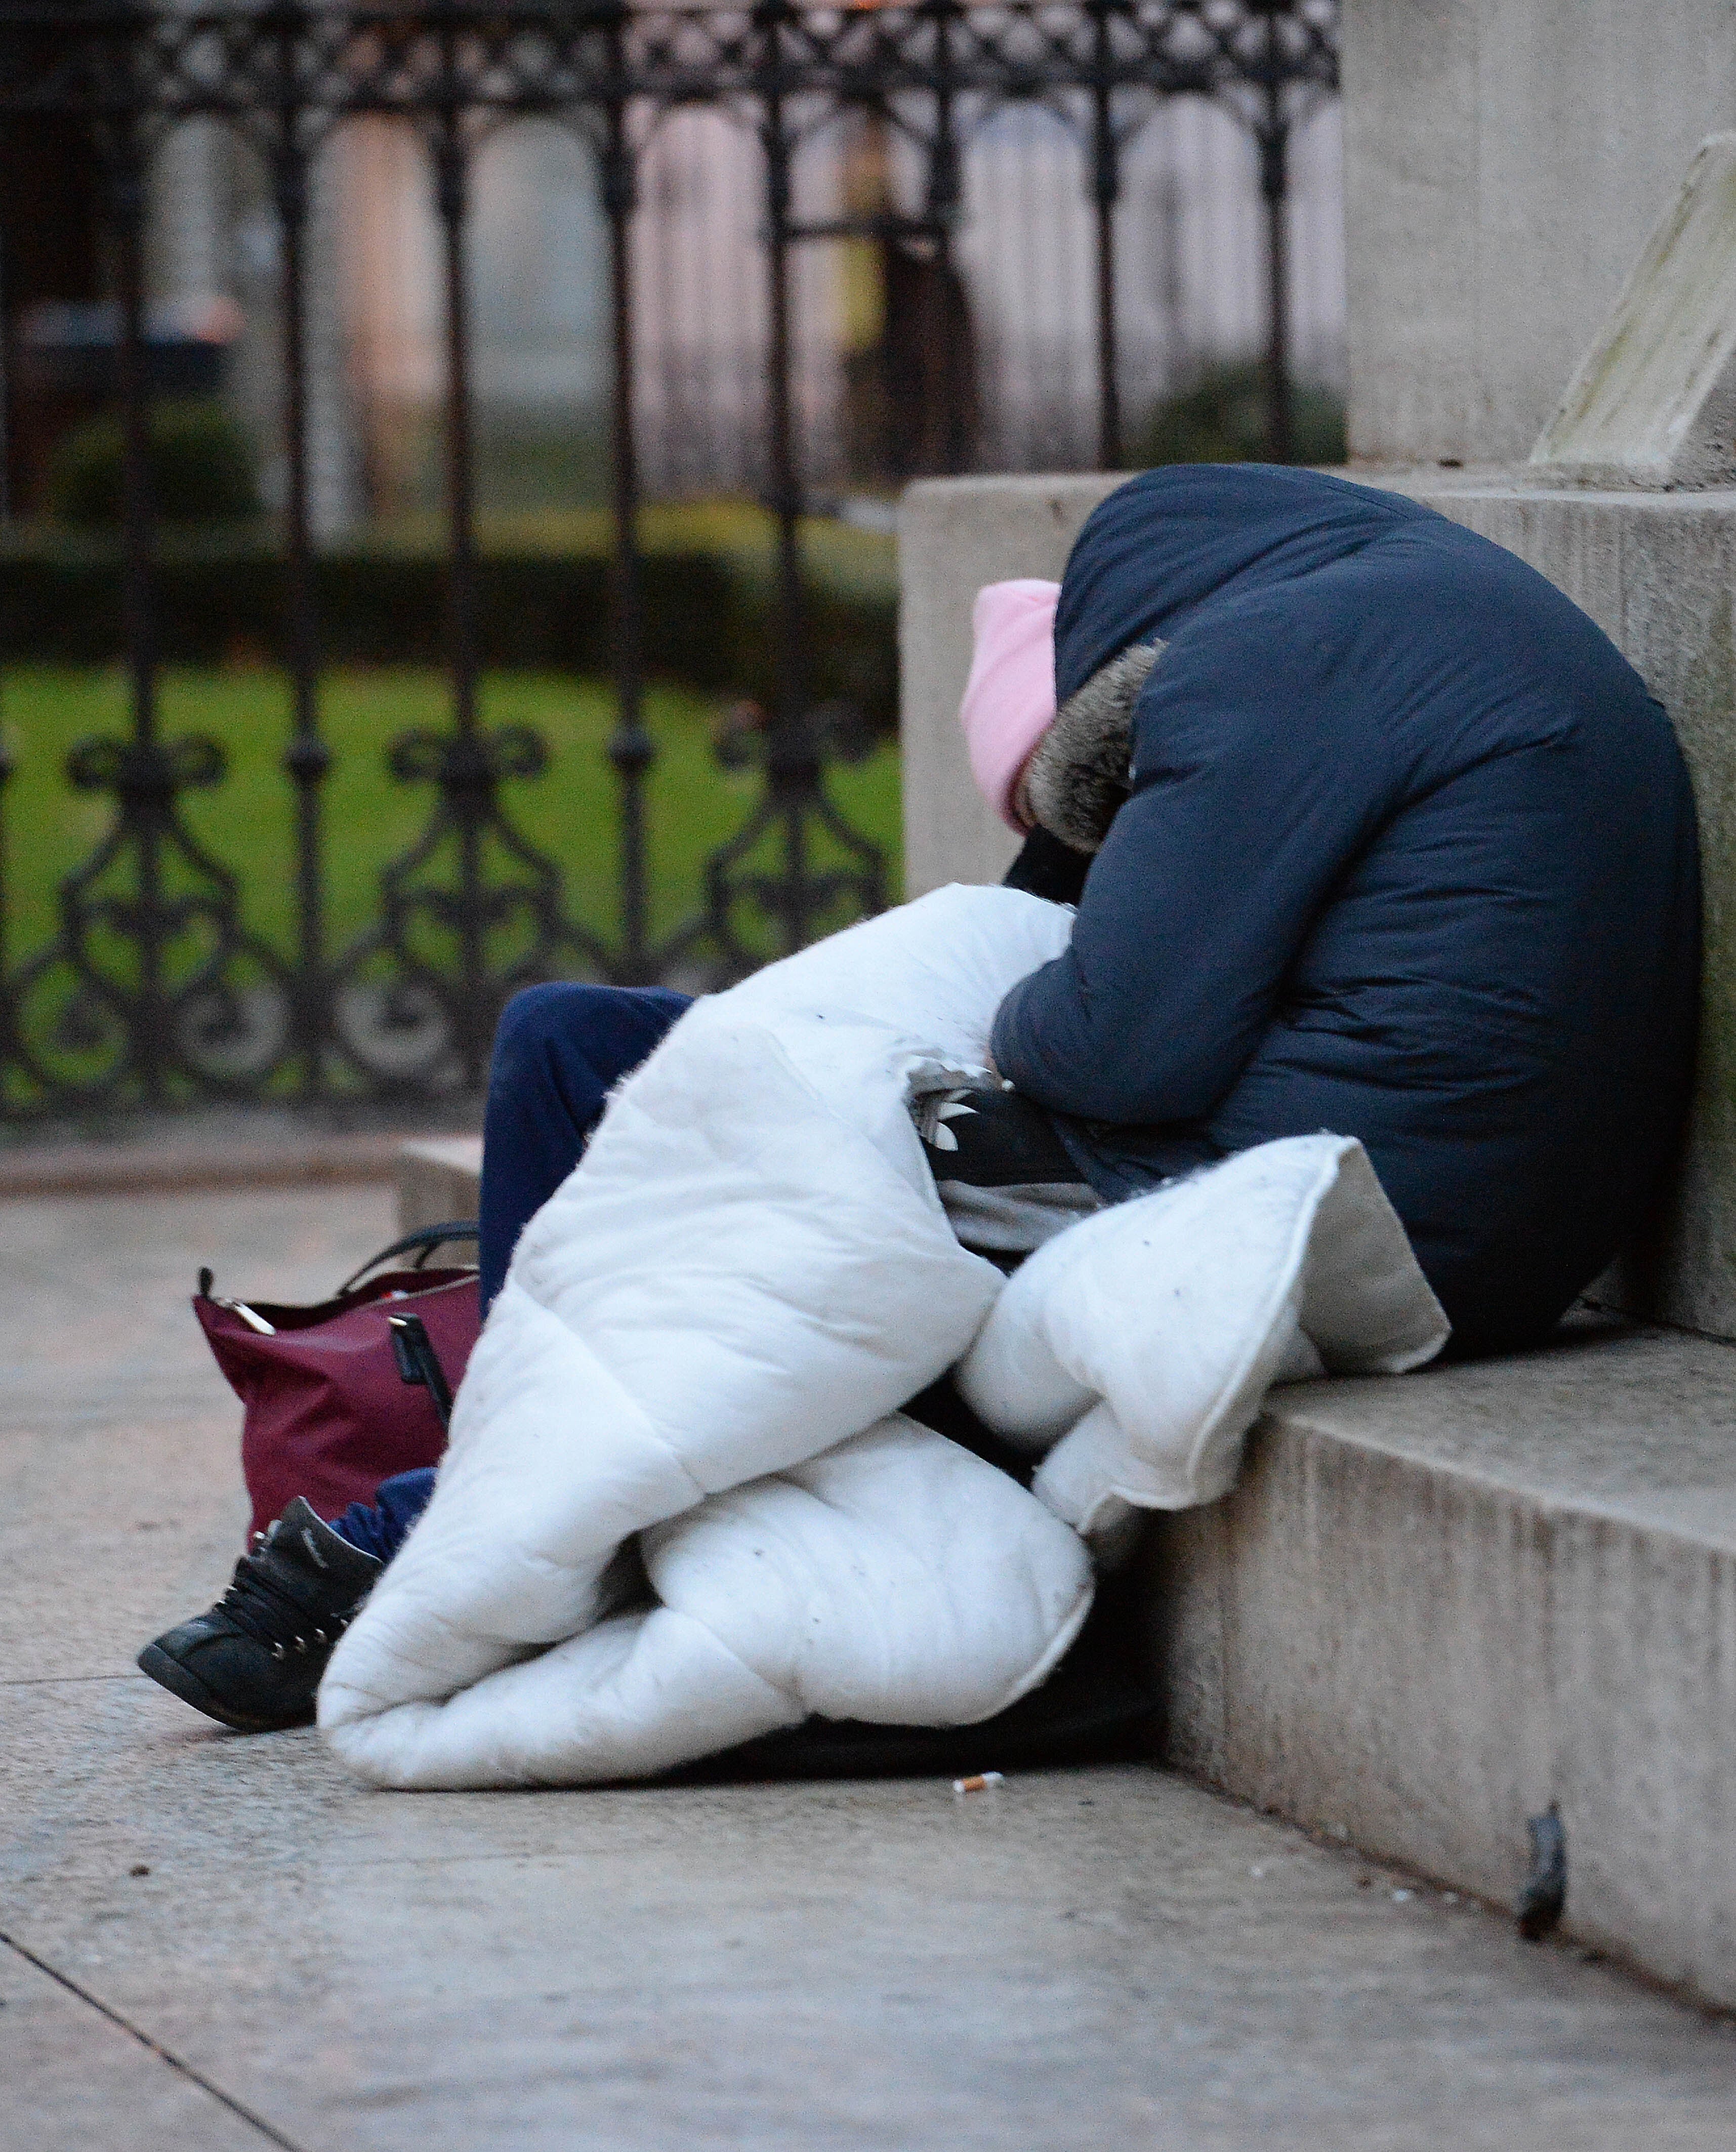 Homeless people sleep in Victoria, central London (Nick Ansell/PA)